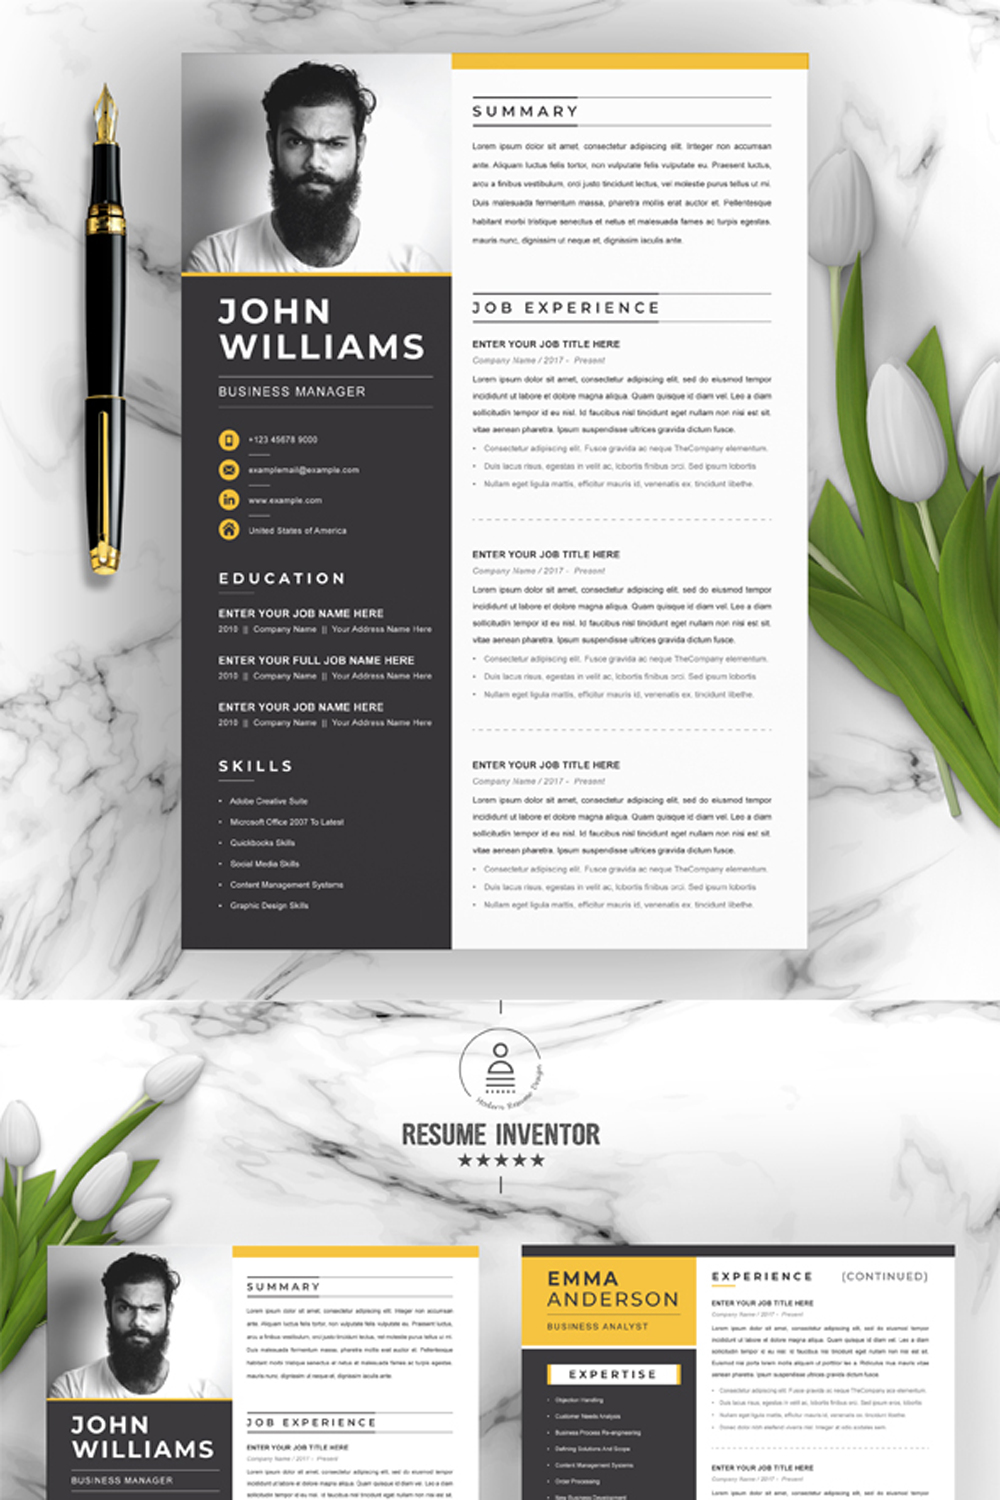 Business Manager CV Template | Modern Resume Template With Cover Letter pinterest preview image.